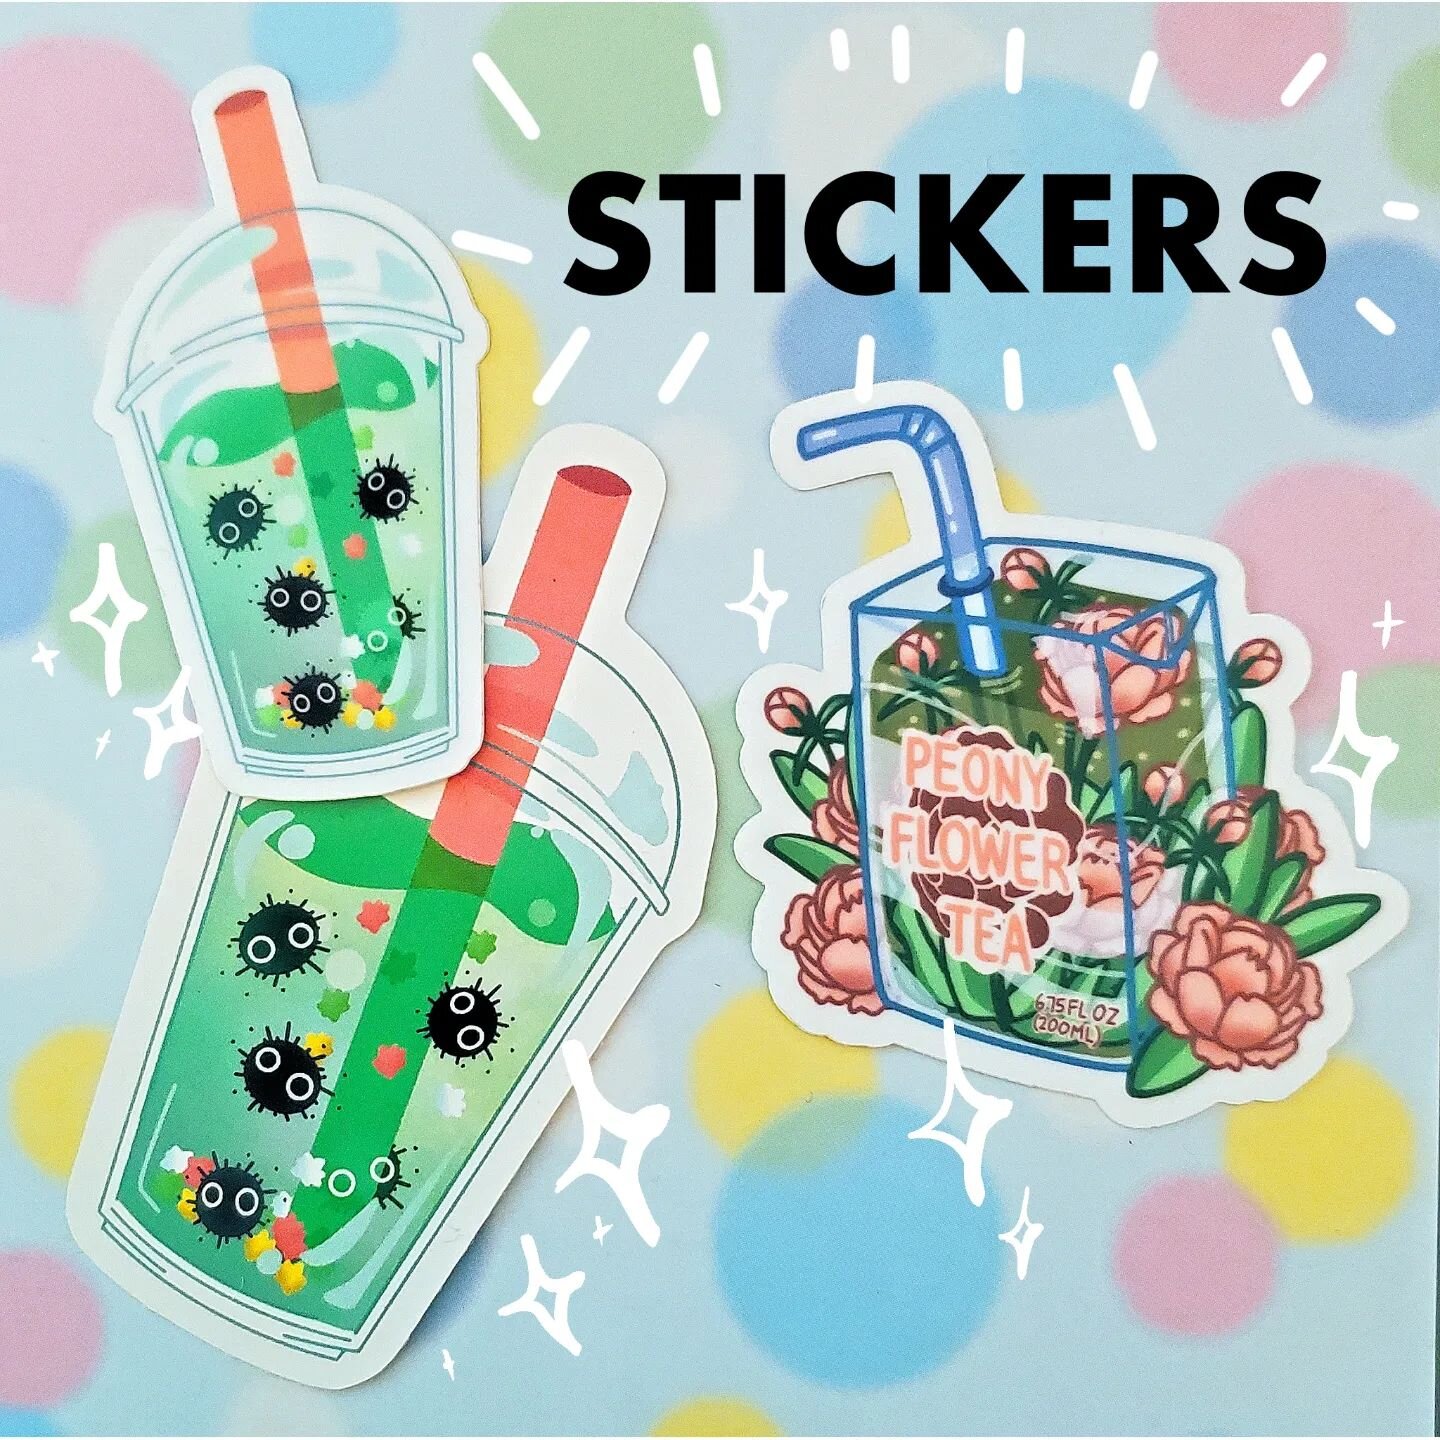 These are the stickers I designed for my shop this month🧃🧋. They are available until September 9th, link in my bio.
.
.
.
.
#procreate #stickers #drawing #artistofinstagram #smallbusiness #shop #cute #studioghibli #tea #boba #instaart #anime